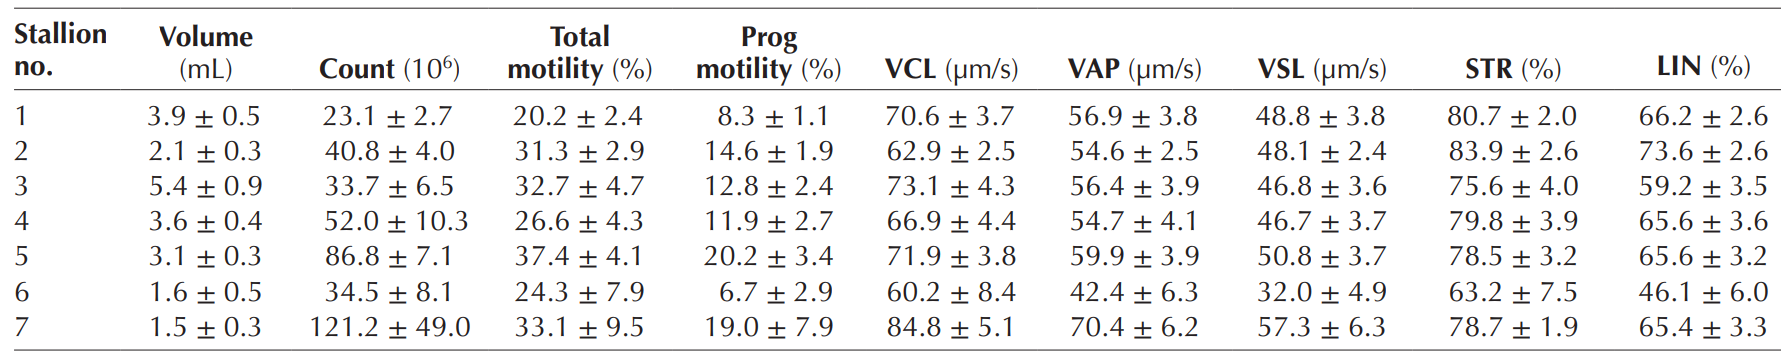 Table 1 - Quality of the dismount samples for individual stallions 